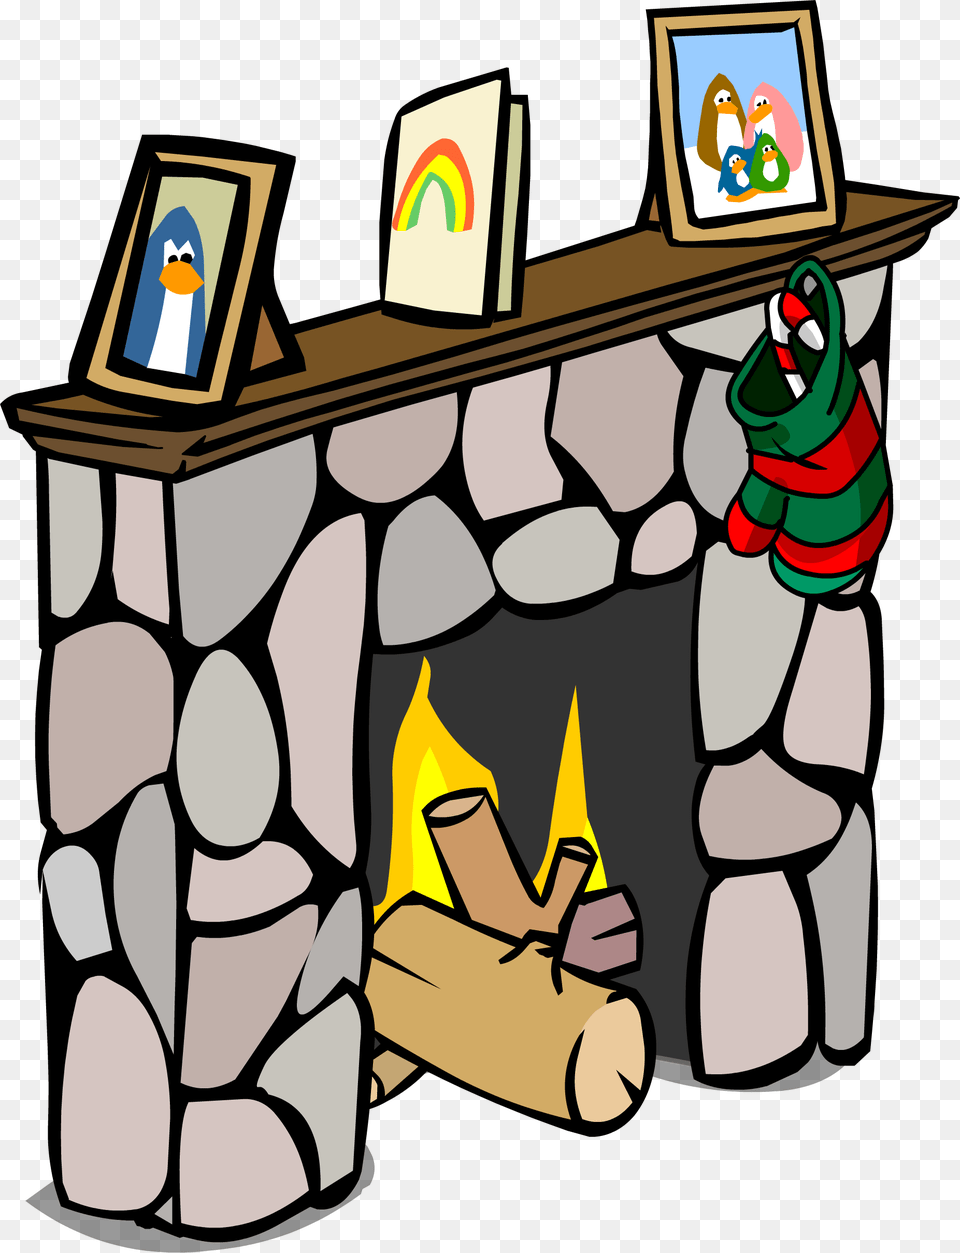 Fireplace Sprite Fireplace Club Penguin Tv, Indoors, Hearth Png Image